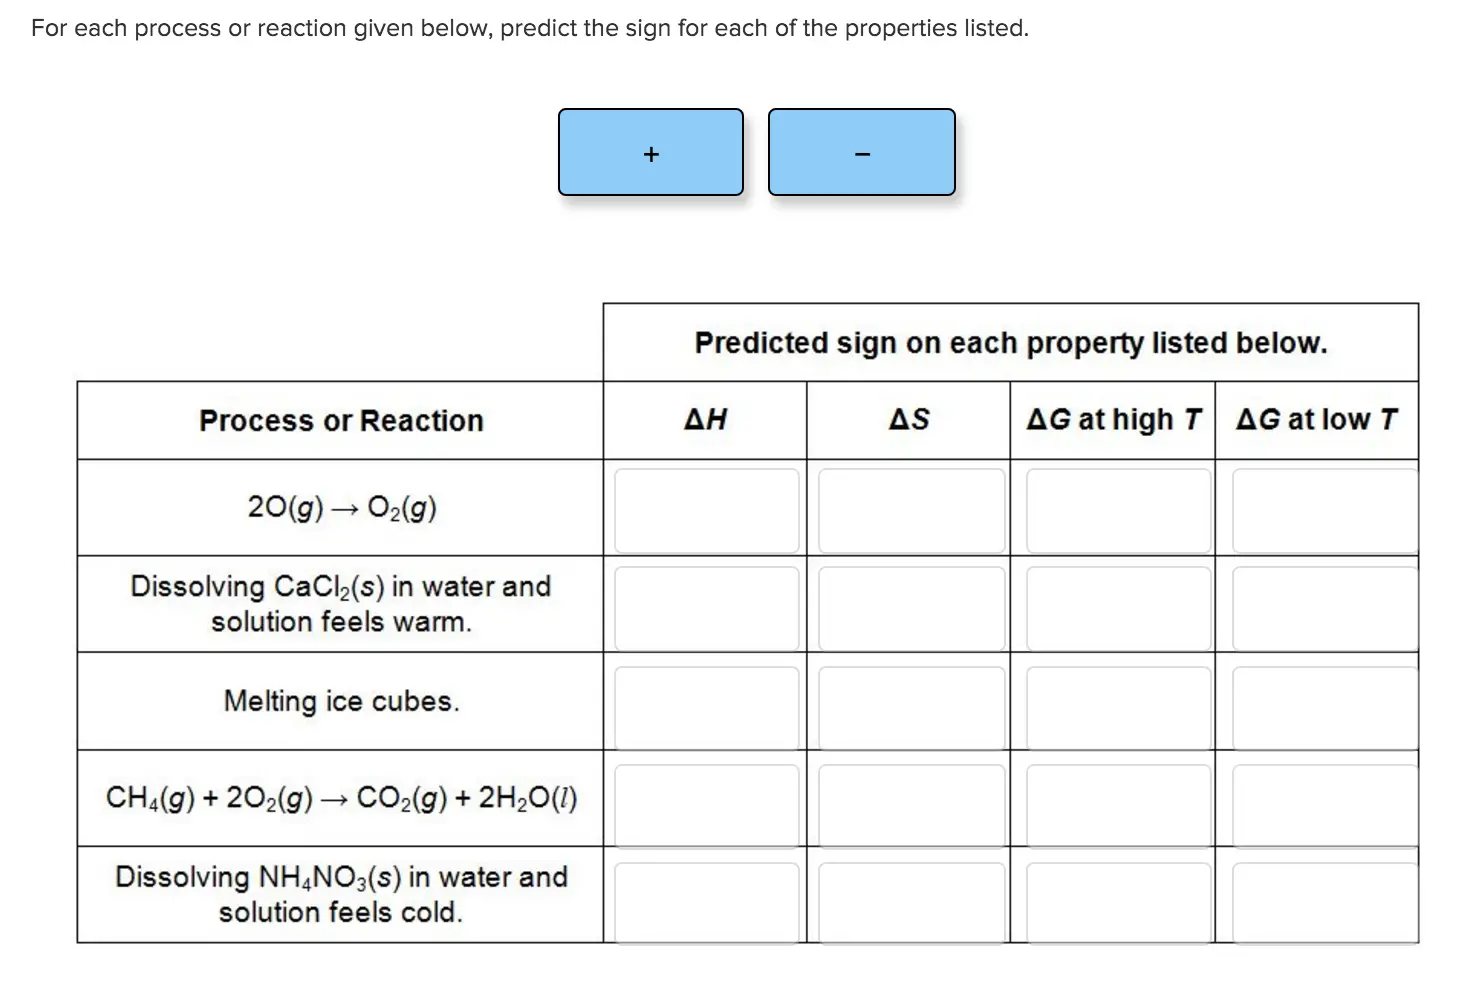 For each process or reaction given below, predict the sign for
each of the properties listed.

For each process or reaction given below, predict the sign for each of the properties listed.